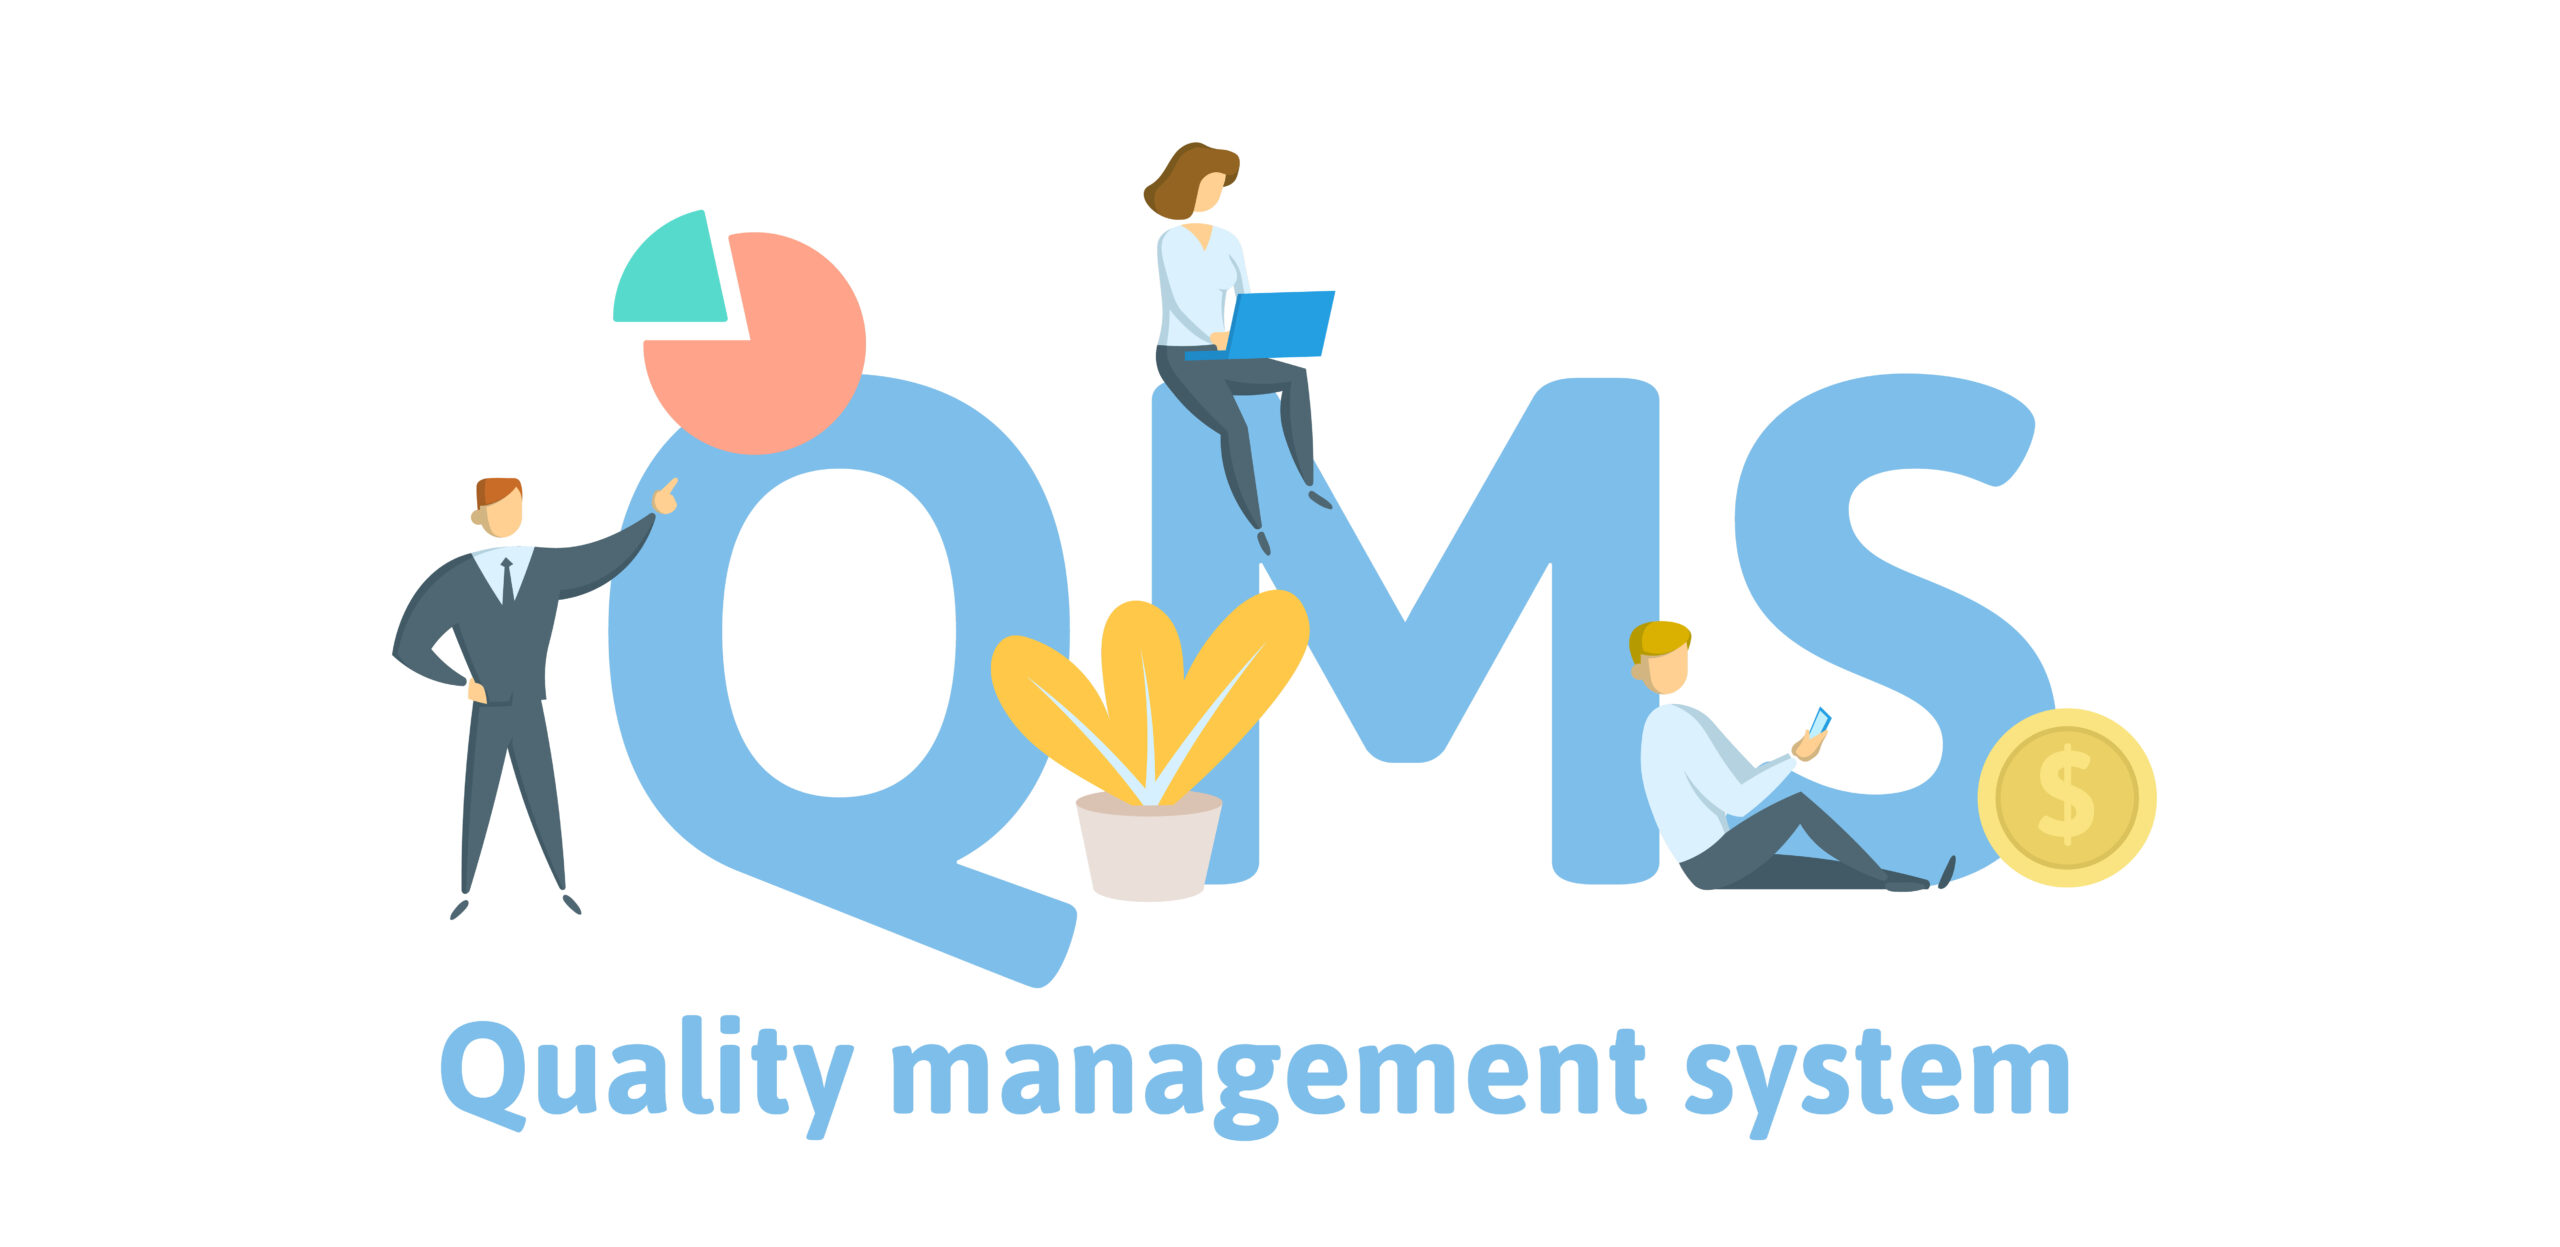 What is Quality Management System (QMS) & types ?